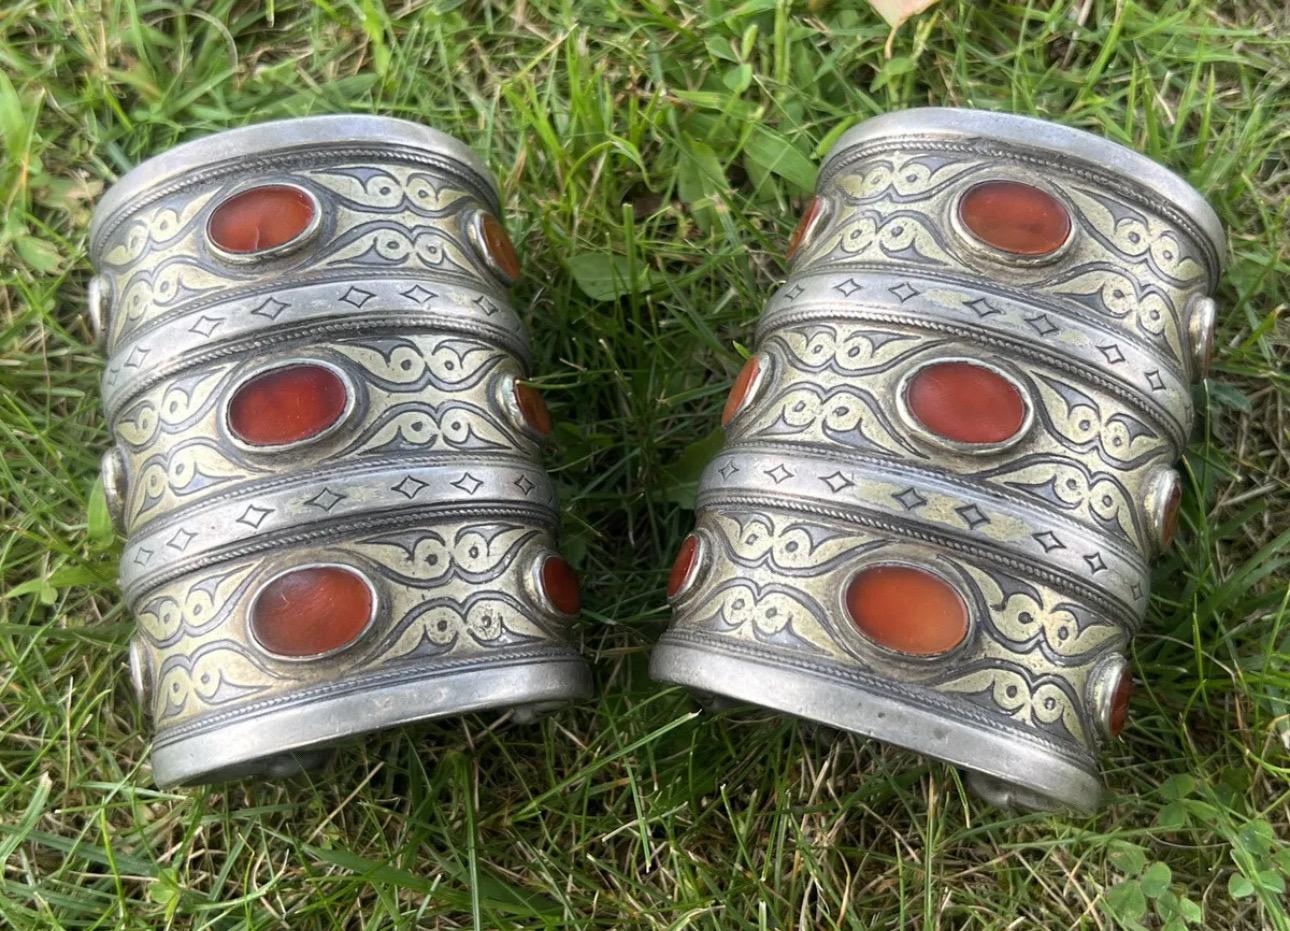 This is a unique and beautiful set of two old Tekke Carnelian tribal Turkoman Turkmen silver cuff bracelets. The intricate handmade design showcases the Middle Eastern and ethnic style of the piece. The bracelets feature stunning orange Carnelian